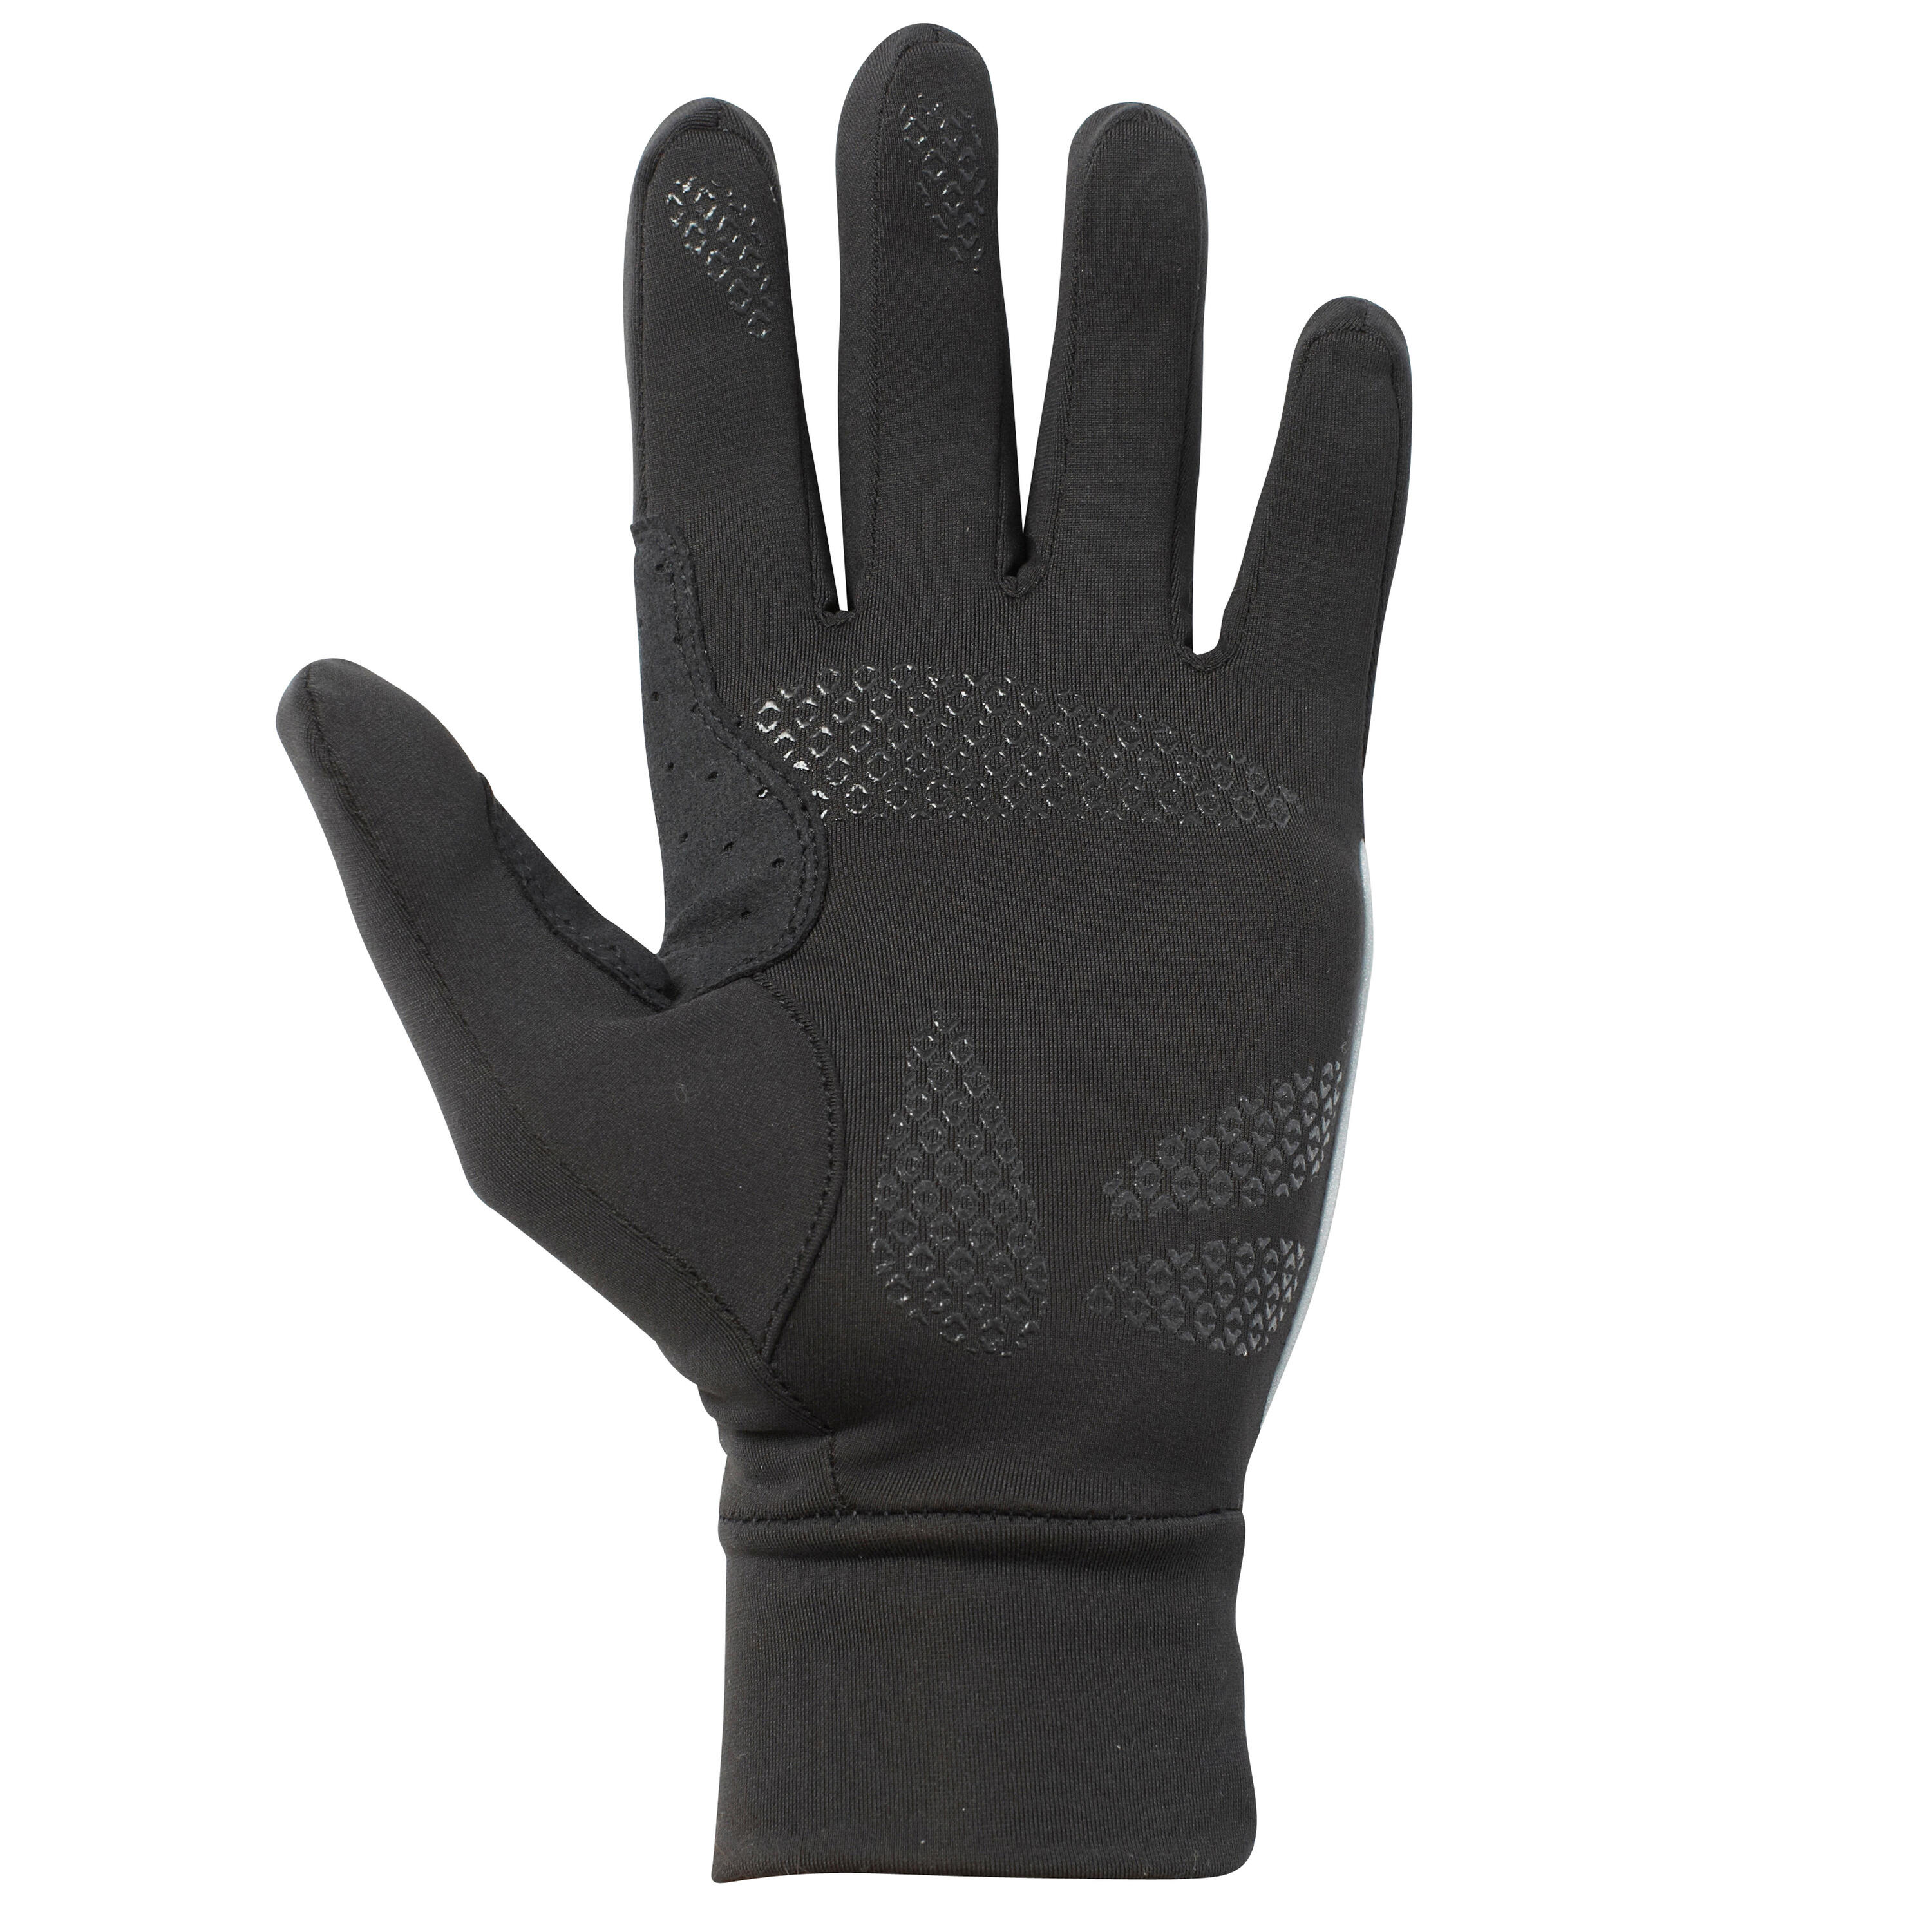 320 Winter Cycling Gloves - Black 2/5